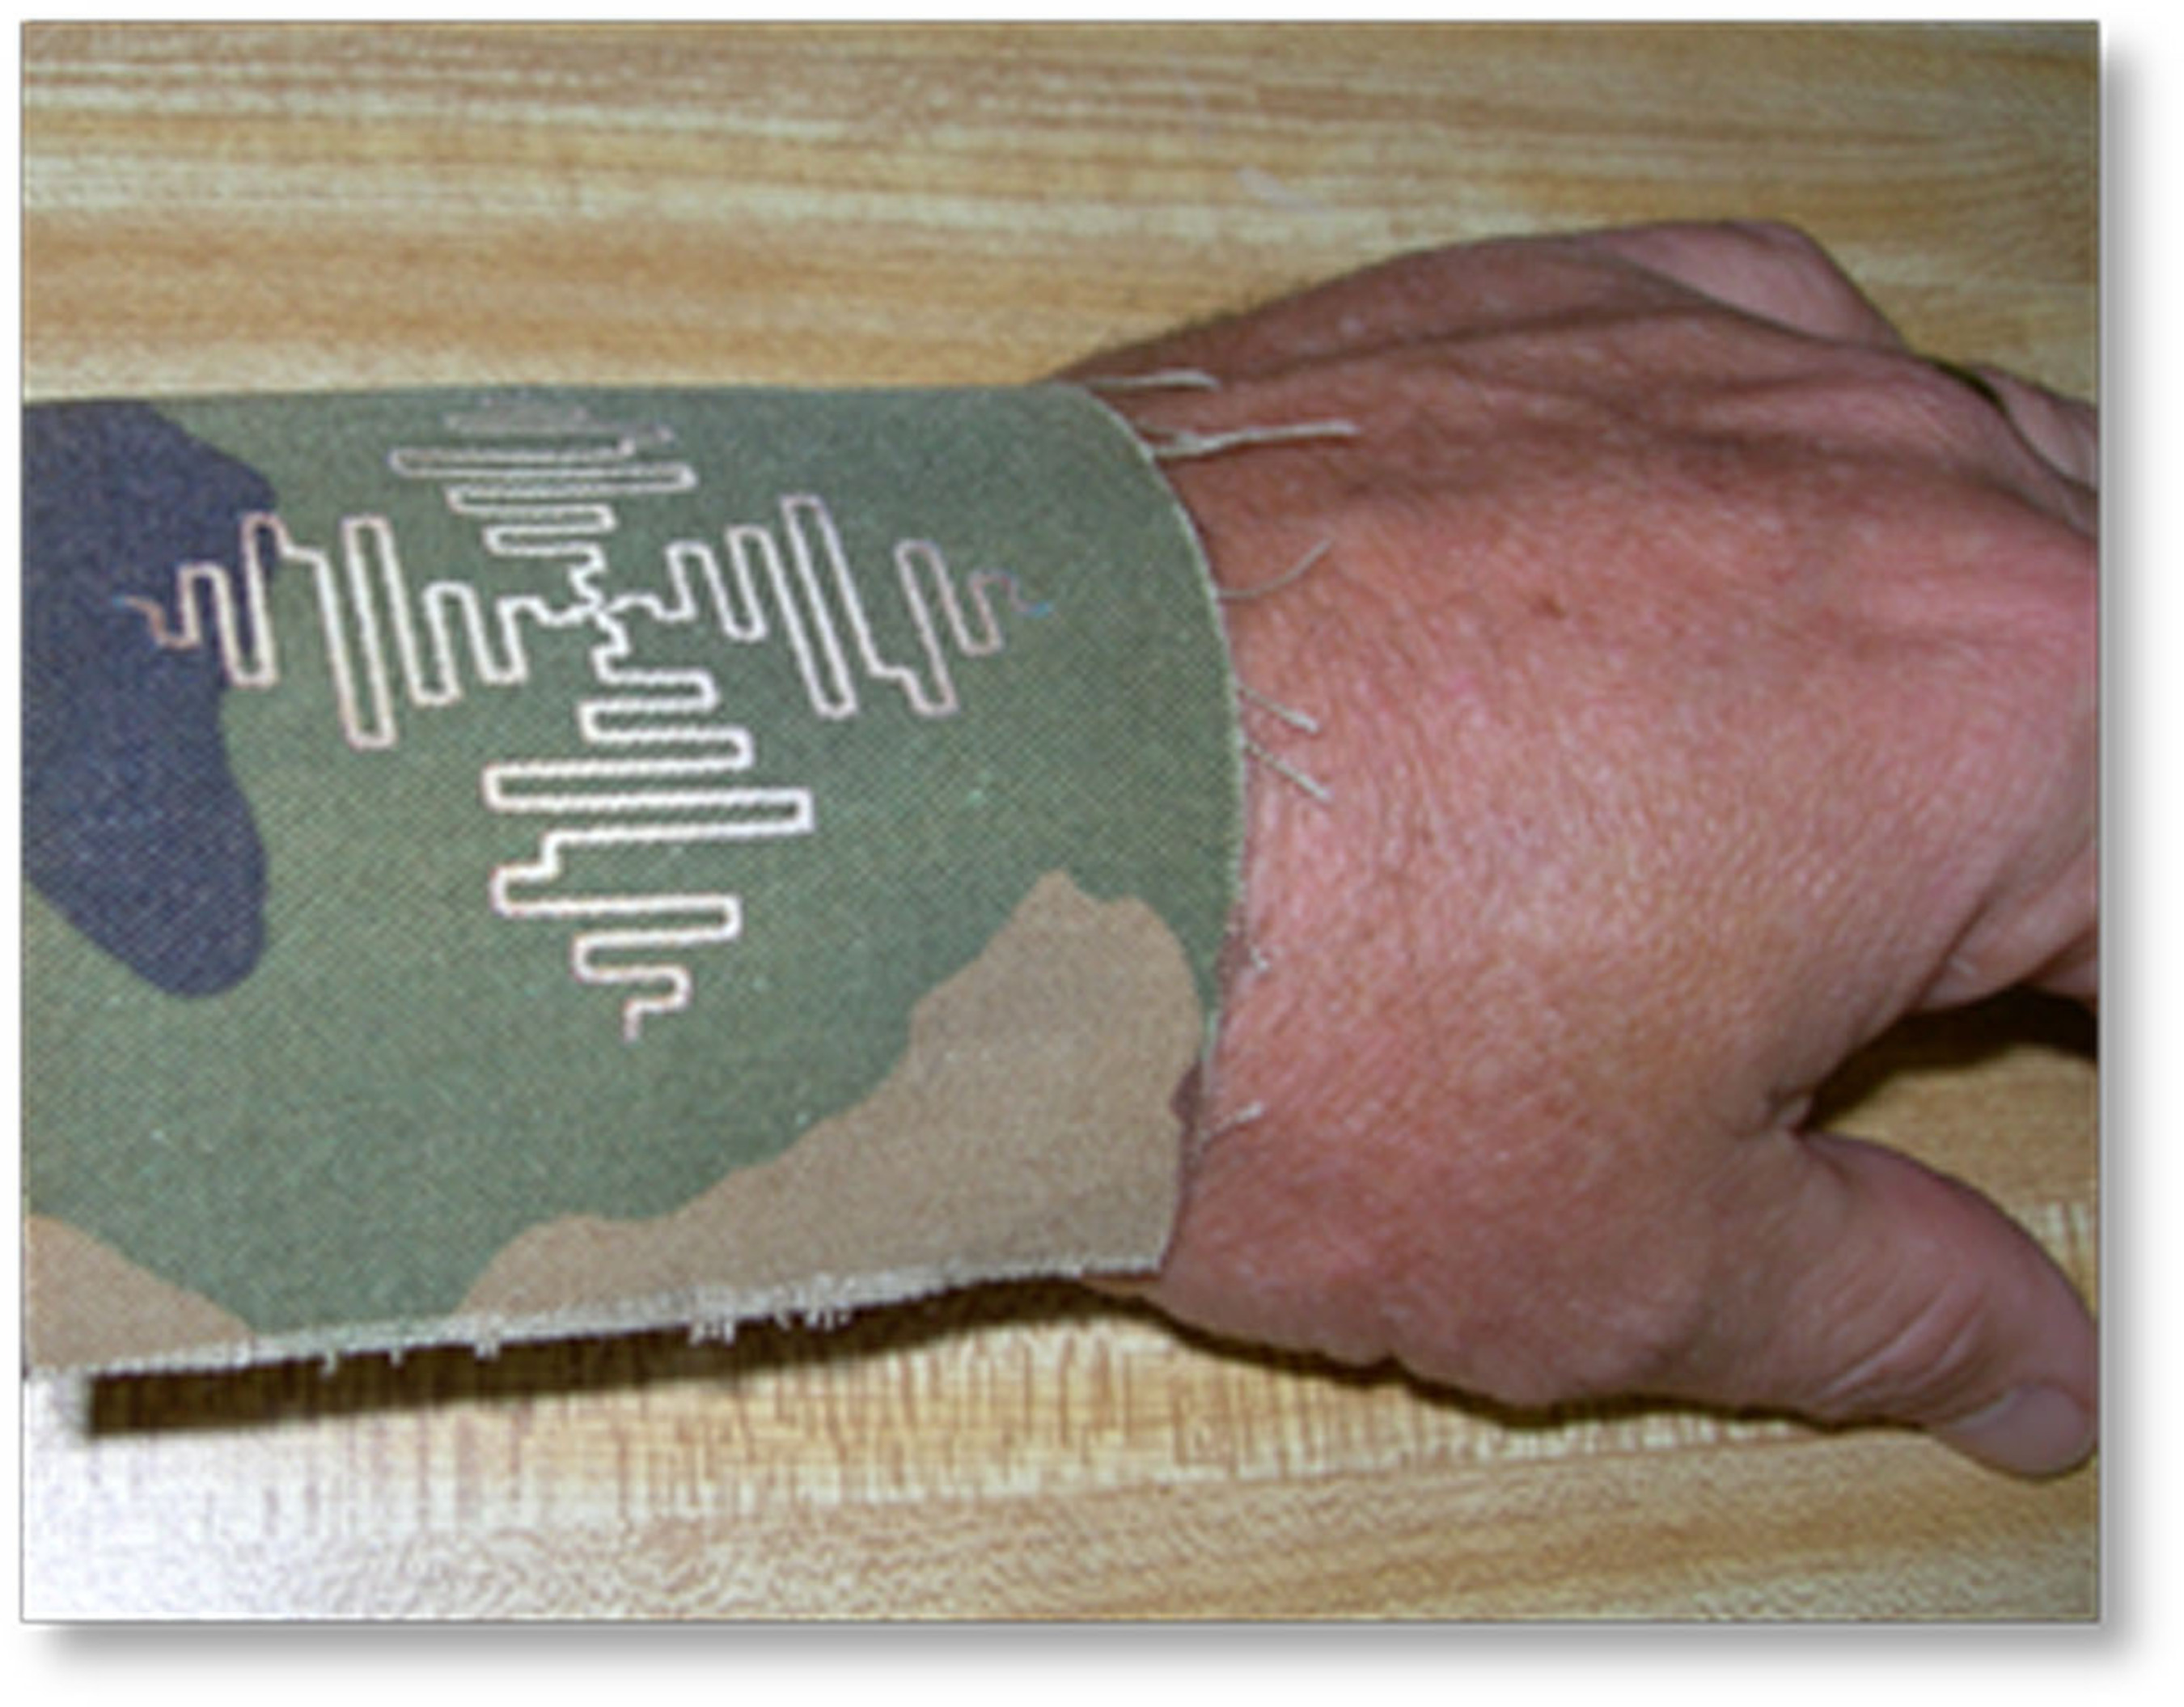 Wrist Antenna: Printing Electronics on Clothing Allows for Lighter, more Ubiquitous Communications Capabilities. Courtesy, US Army (PRNewsFoto/FlexTech Alliance) (PRNewsFoto/FLEXTECH ALLIANCE)